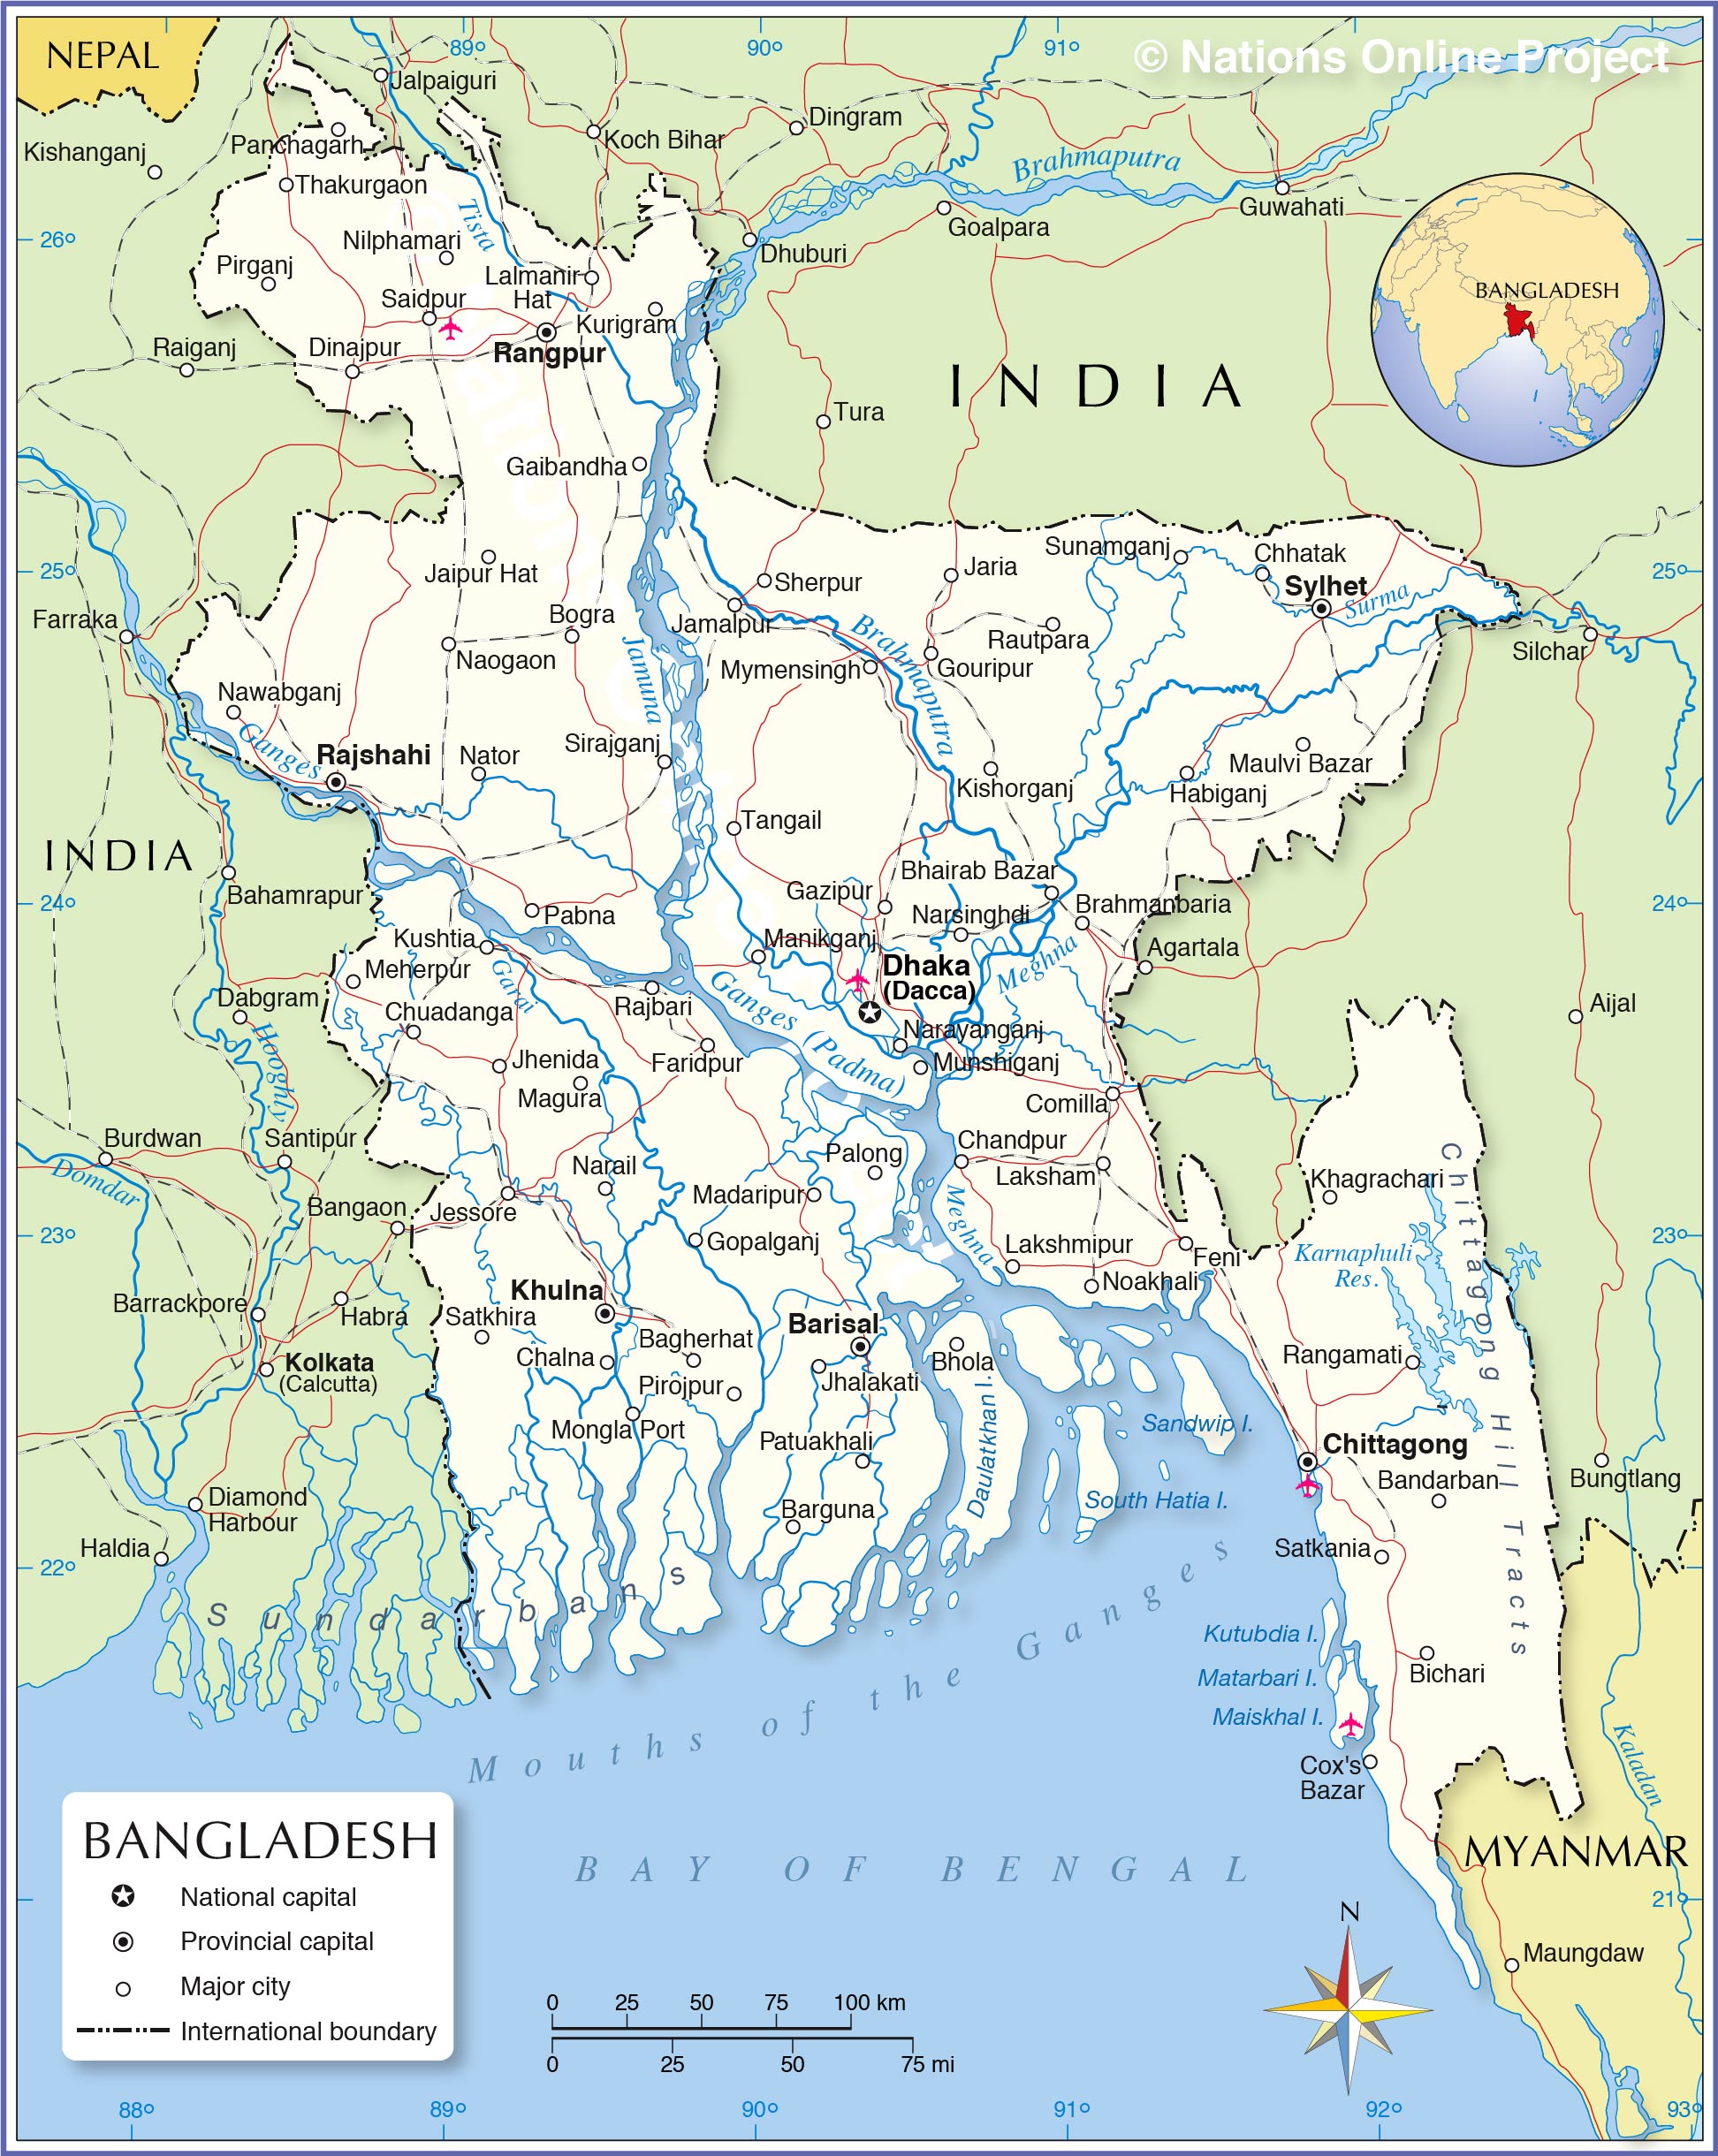 Political Map of Bangladesh - Nations Online Project